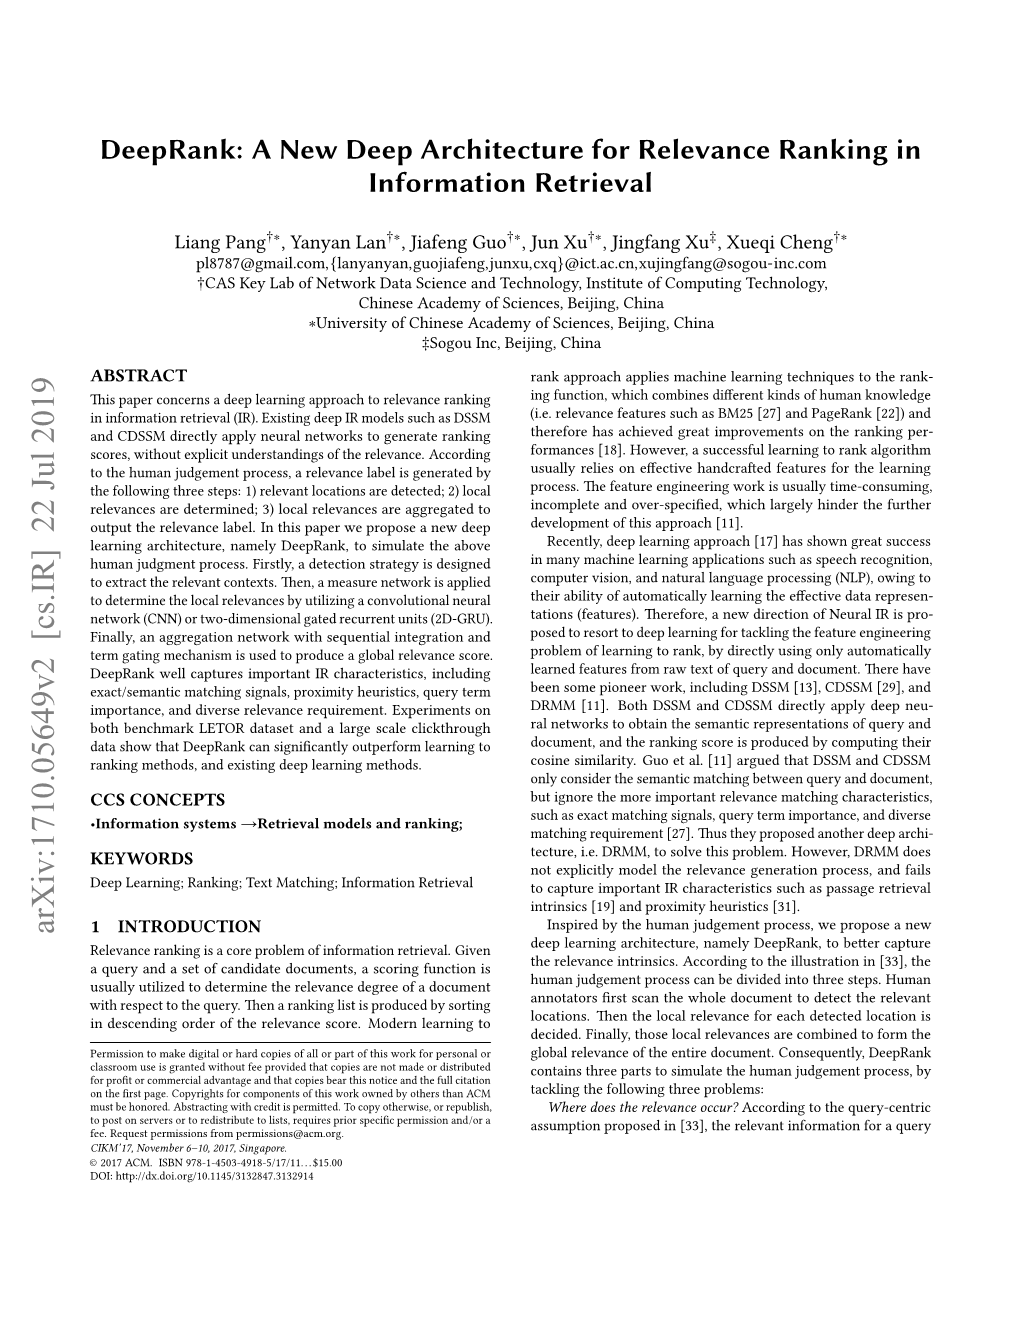 Deeprank: a New Deep Architecture for Relevance Ranking in Information Retrieval